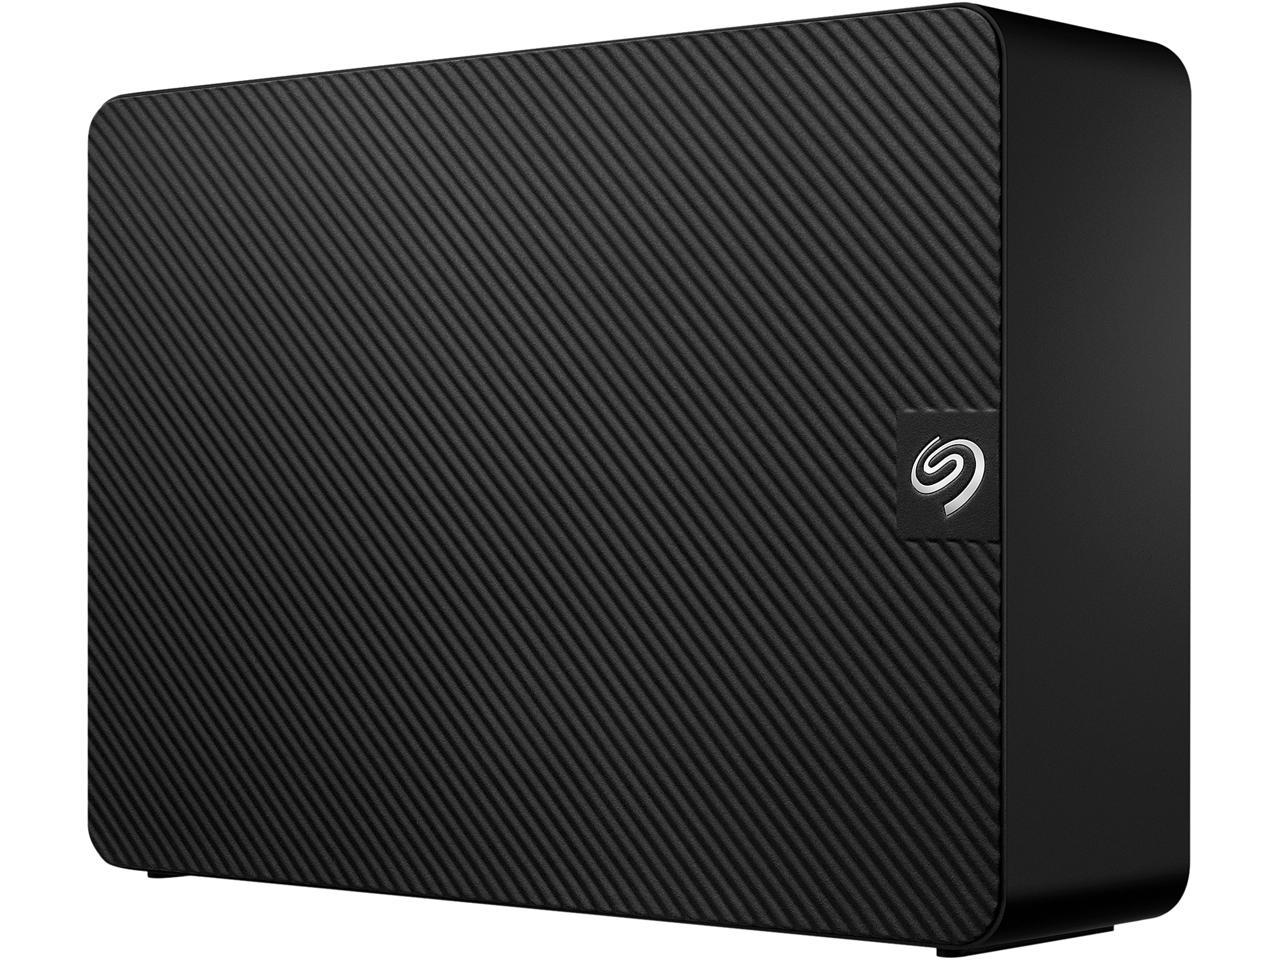 14TB Seagate Expansion Desktop Hard Drive with Rescue Data Recovery Services (STKP14000400) $210